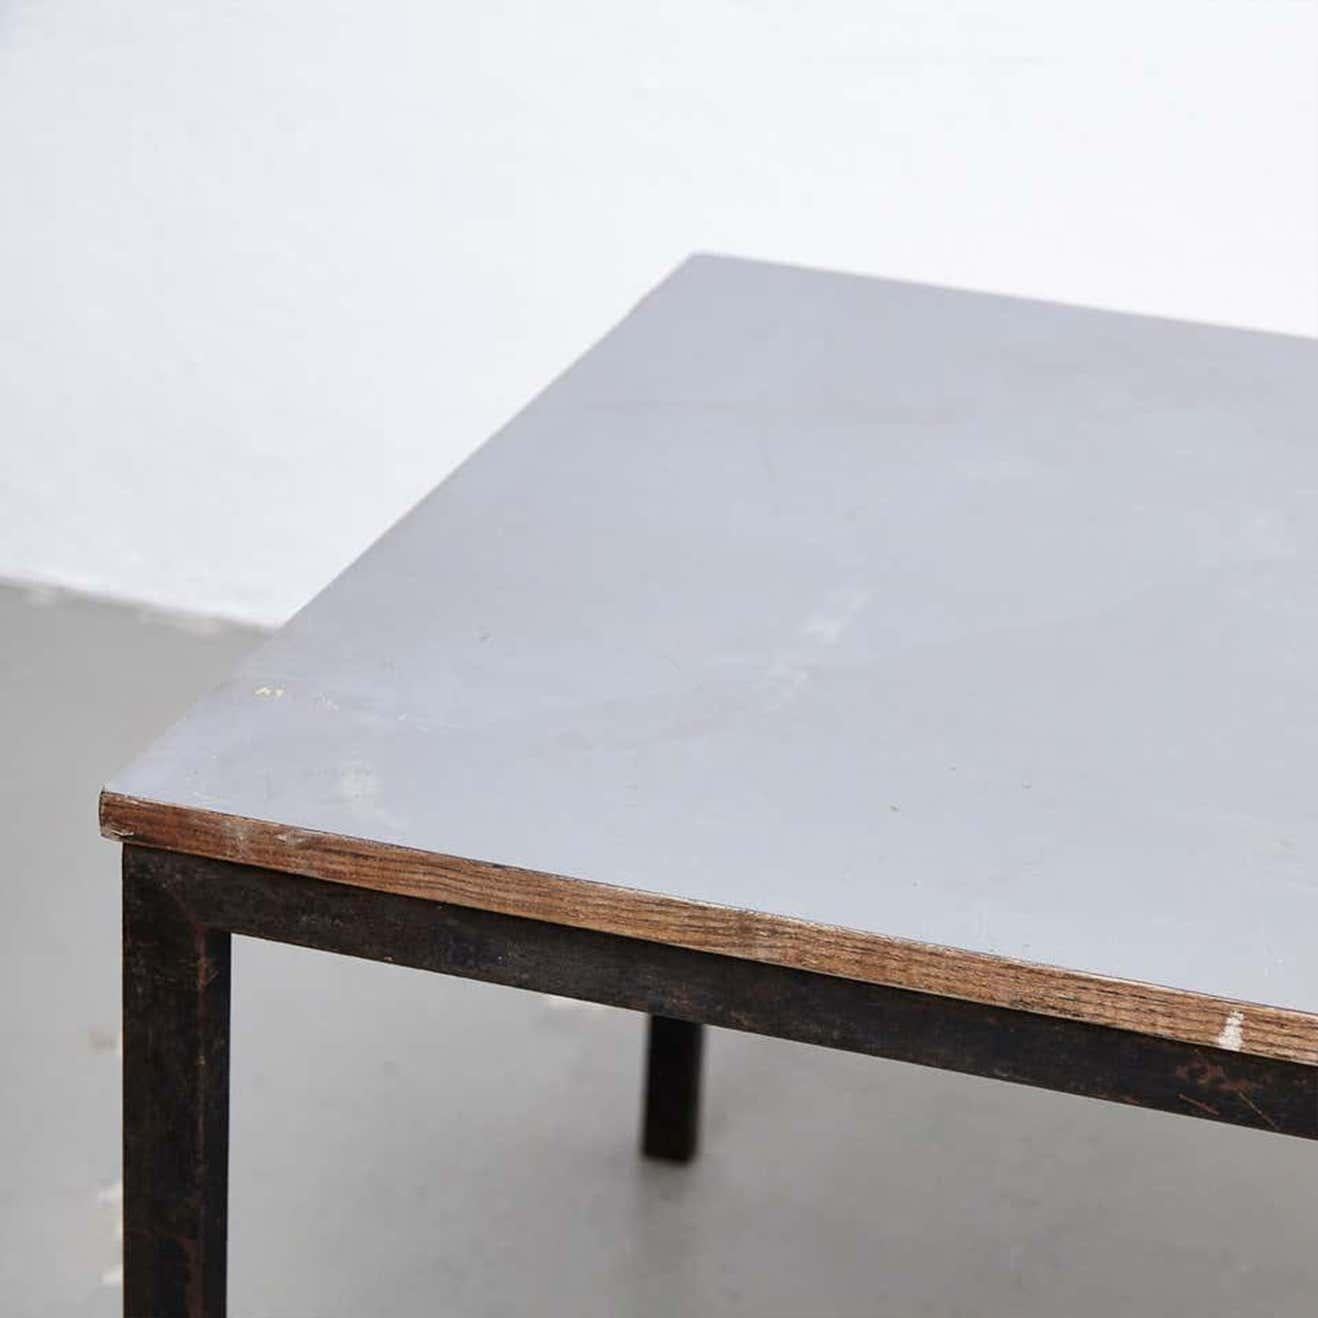 Charlotte Perriand, Mid-Century Modern, Wood Metal Cansado Table, circa 1950 For Sale 7